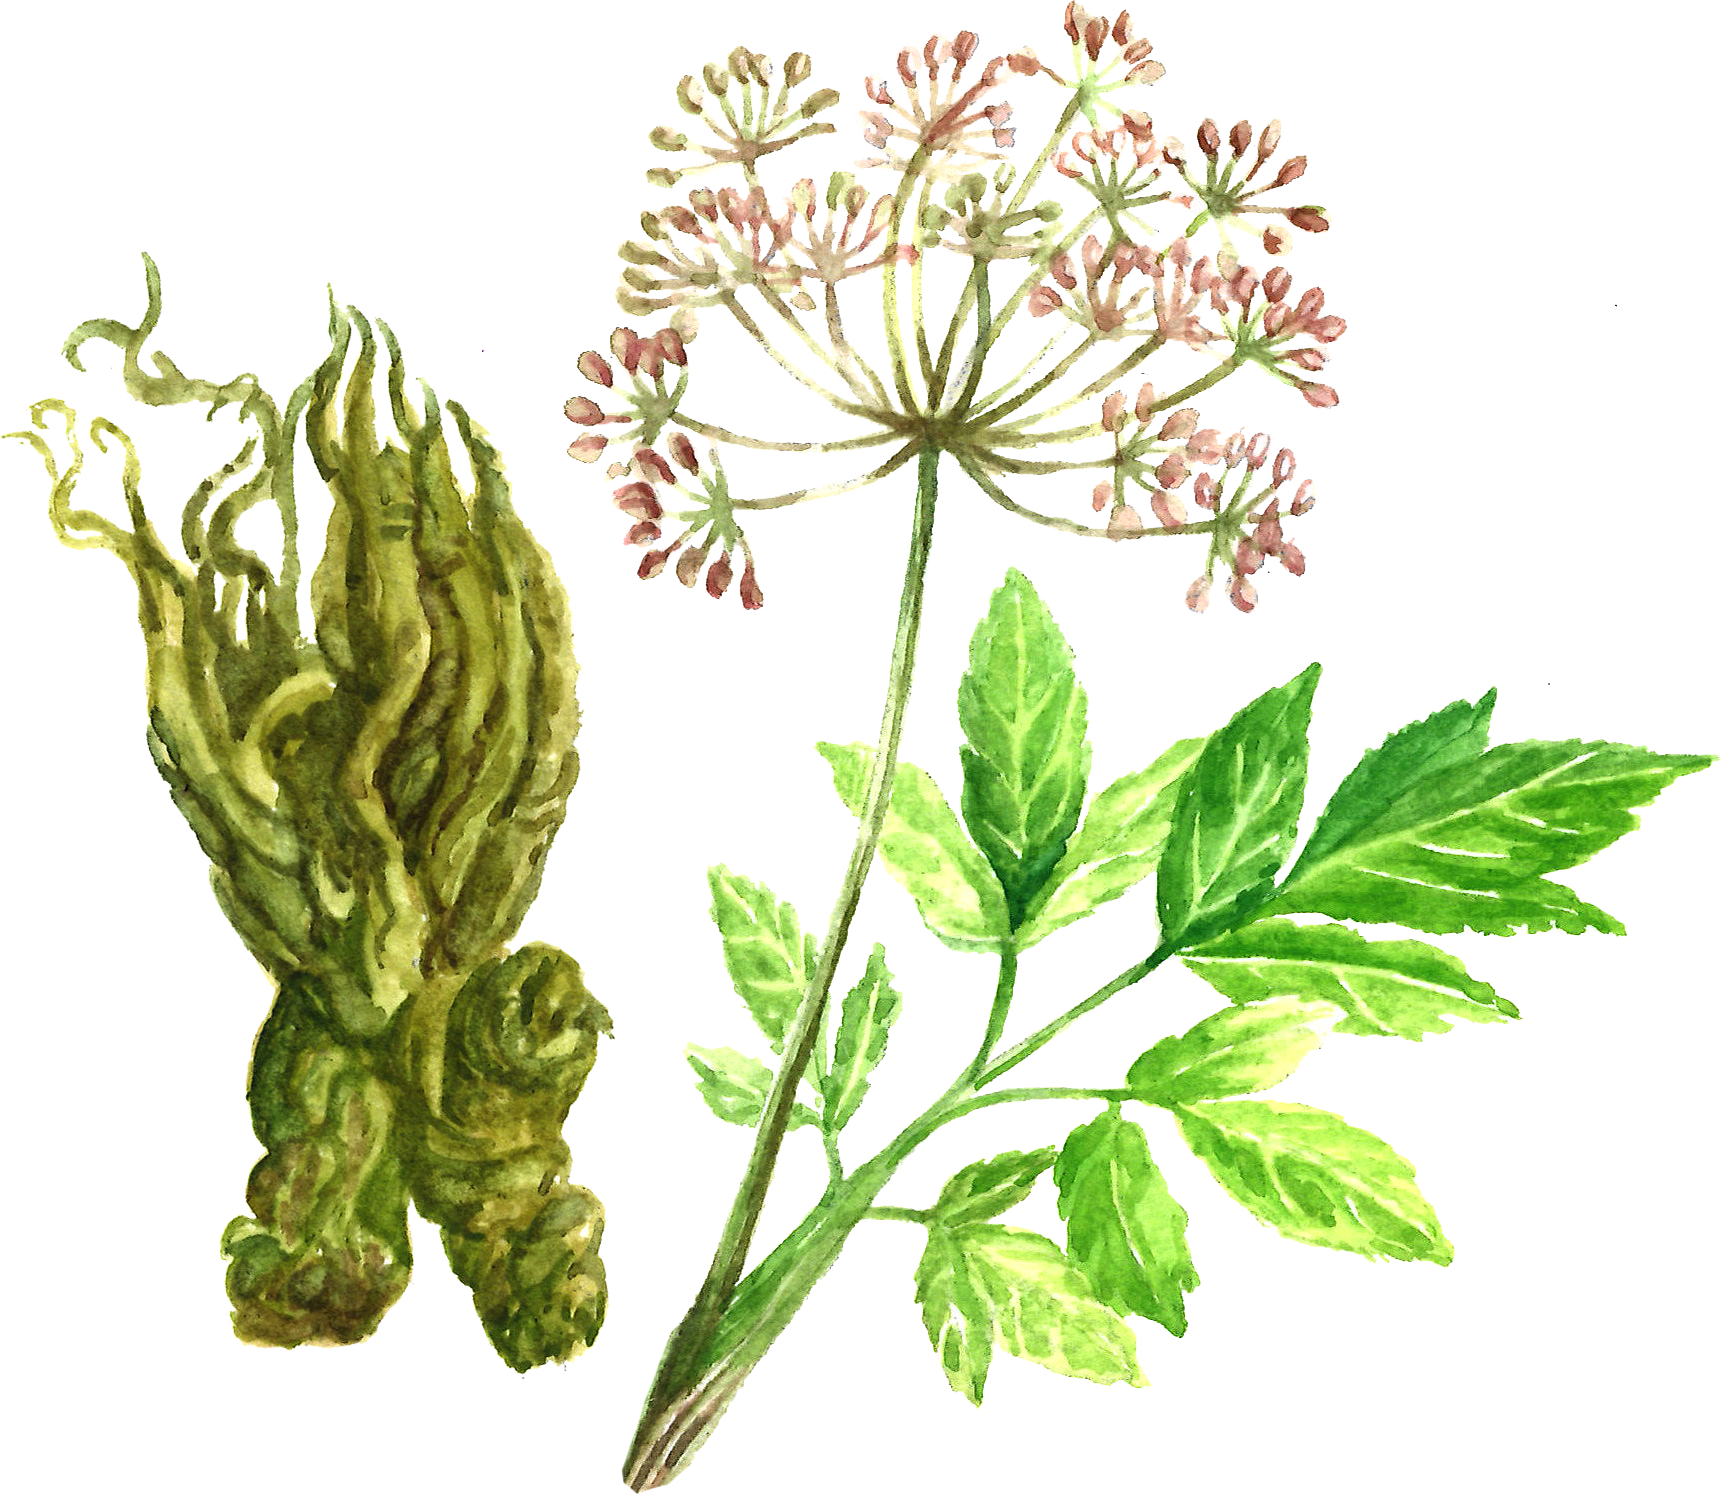 Overview of Angelica